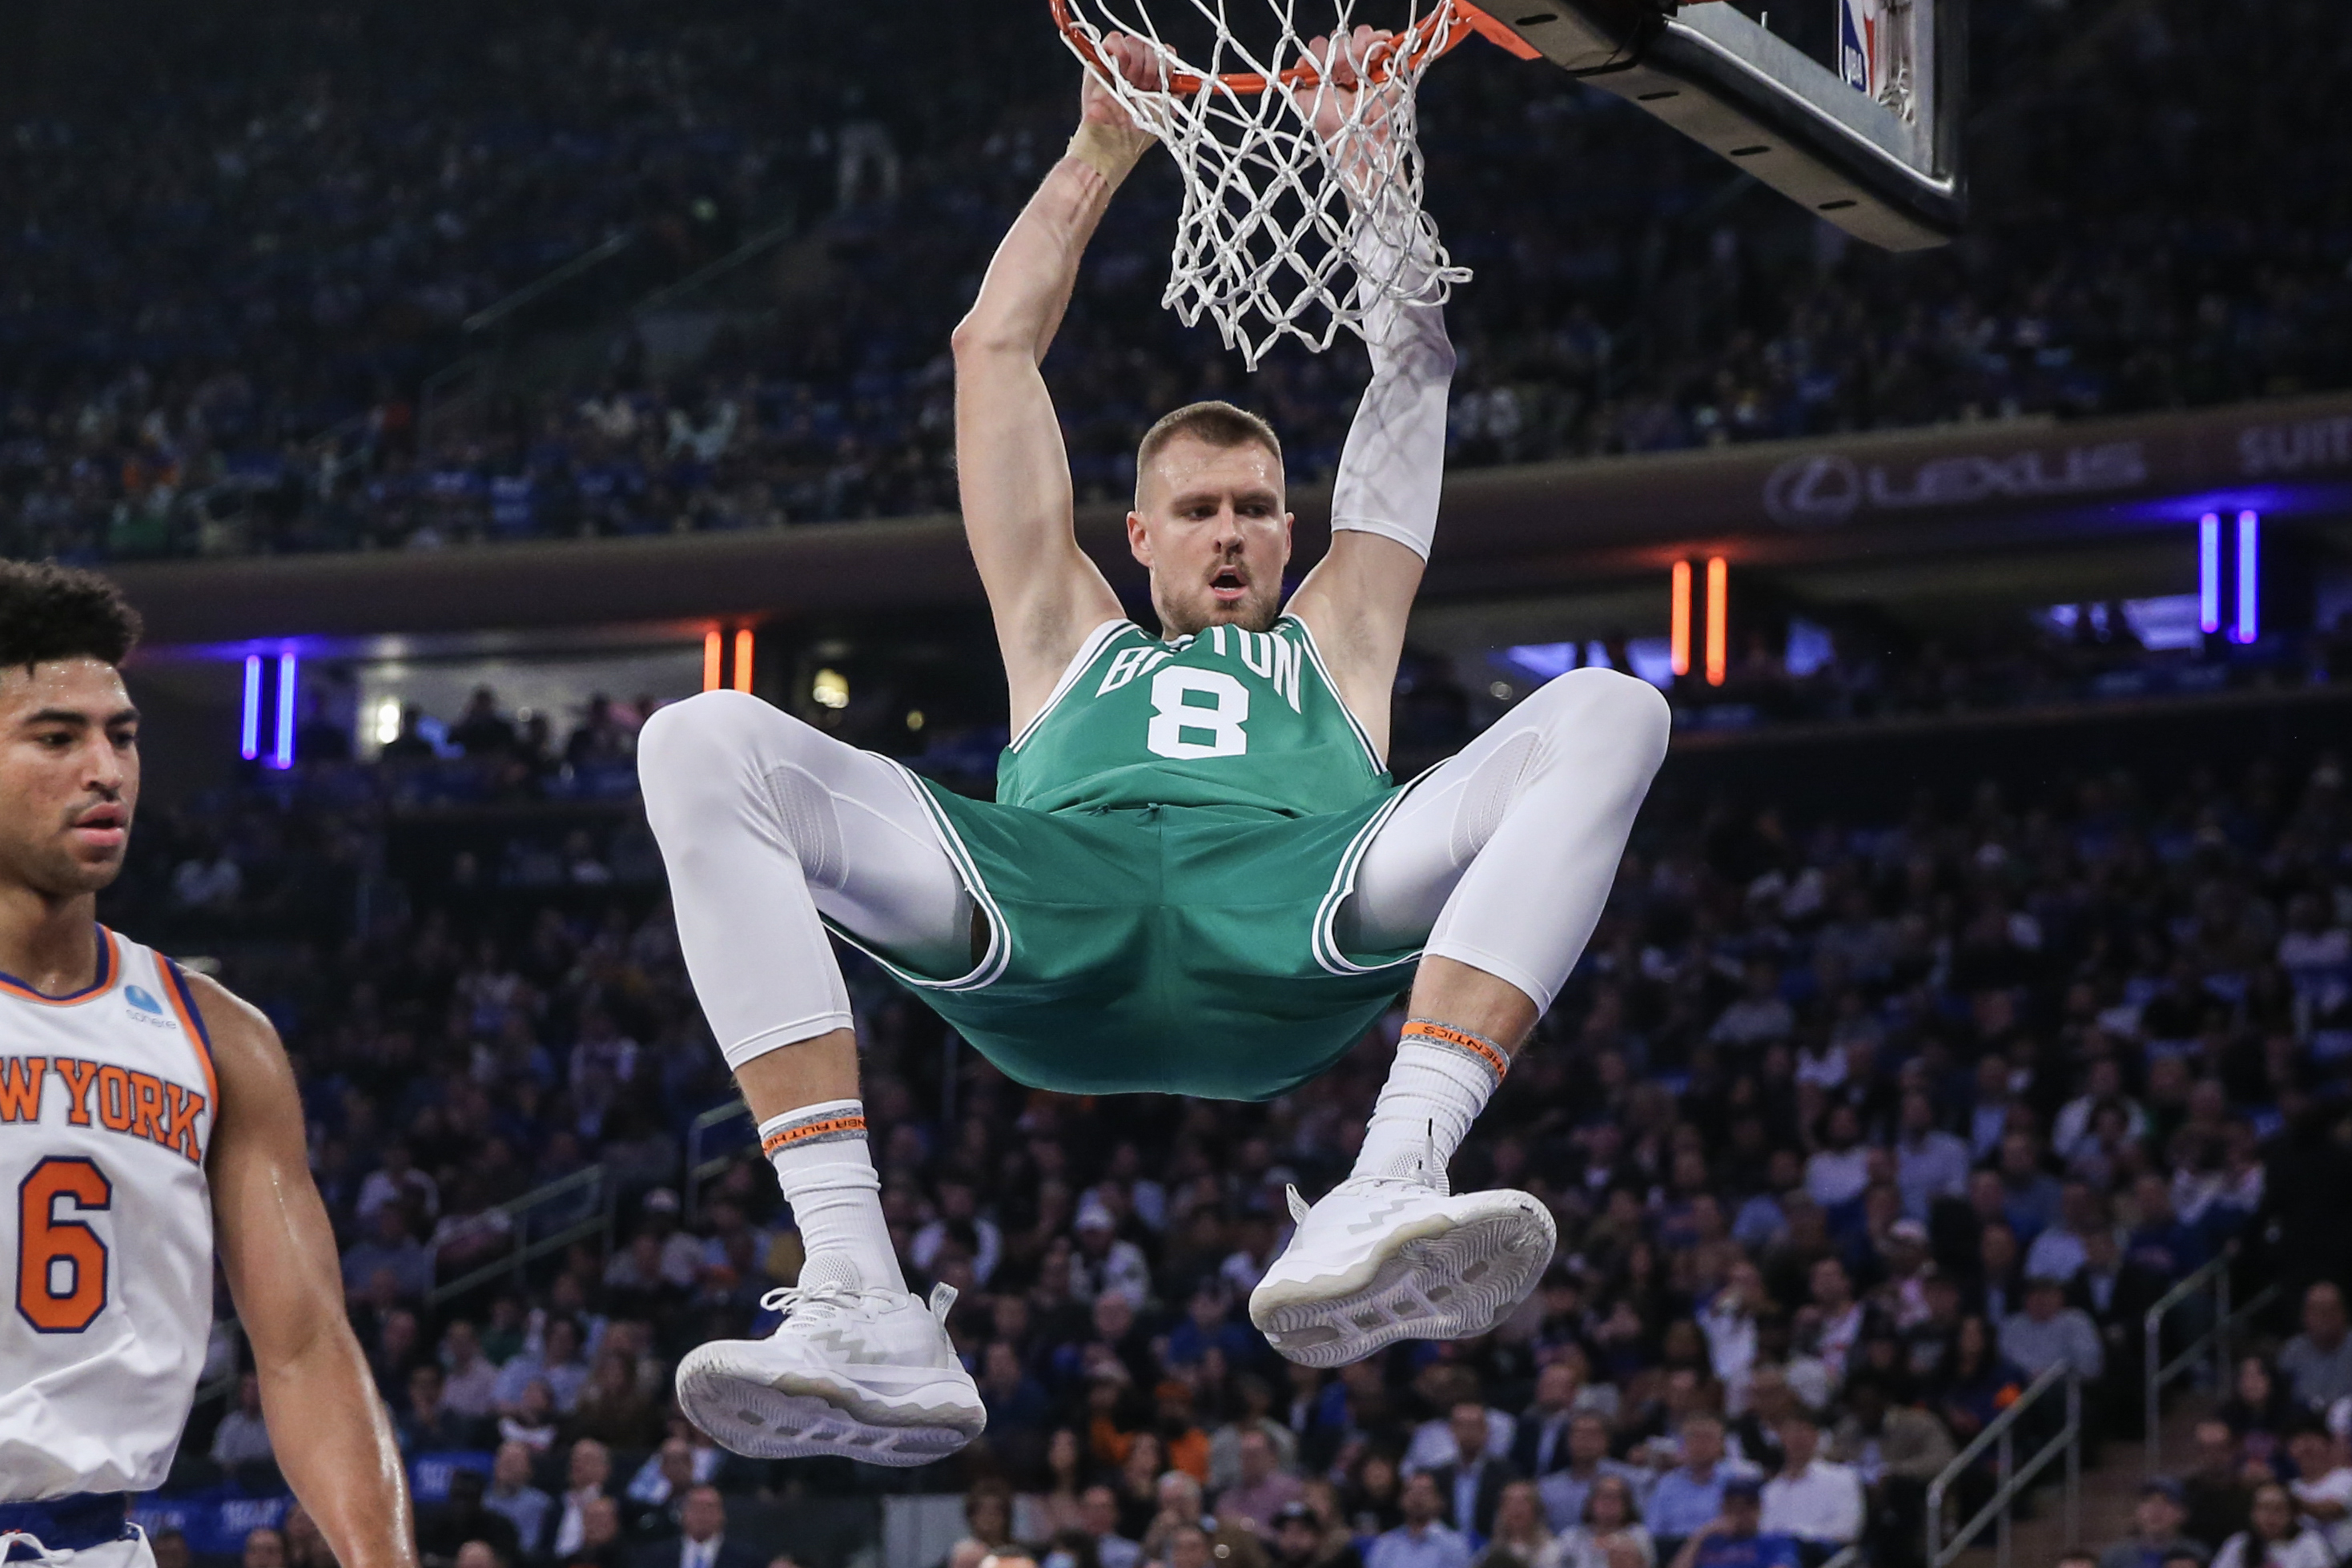 Boston Celtics center Kristaps Porzingis (8) hangs on the rim after a dunk in the first quarter against the New York Knicks at Madison Square Garden